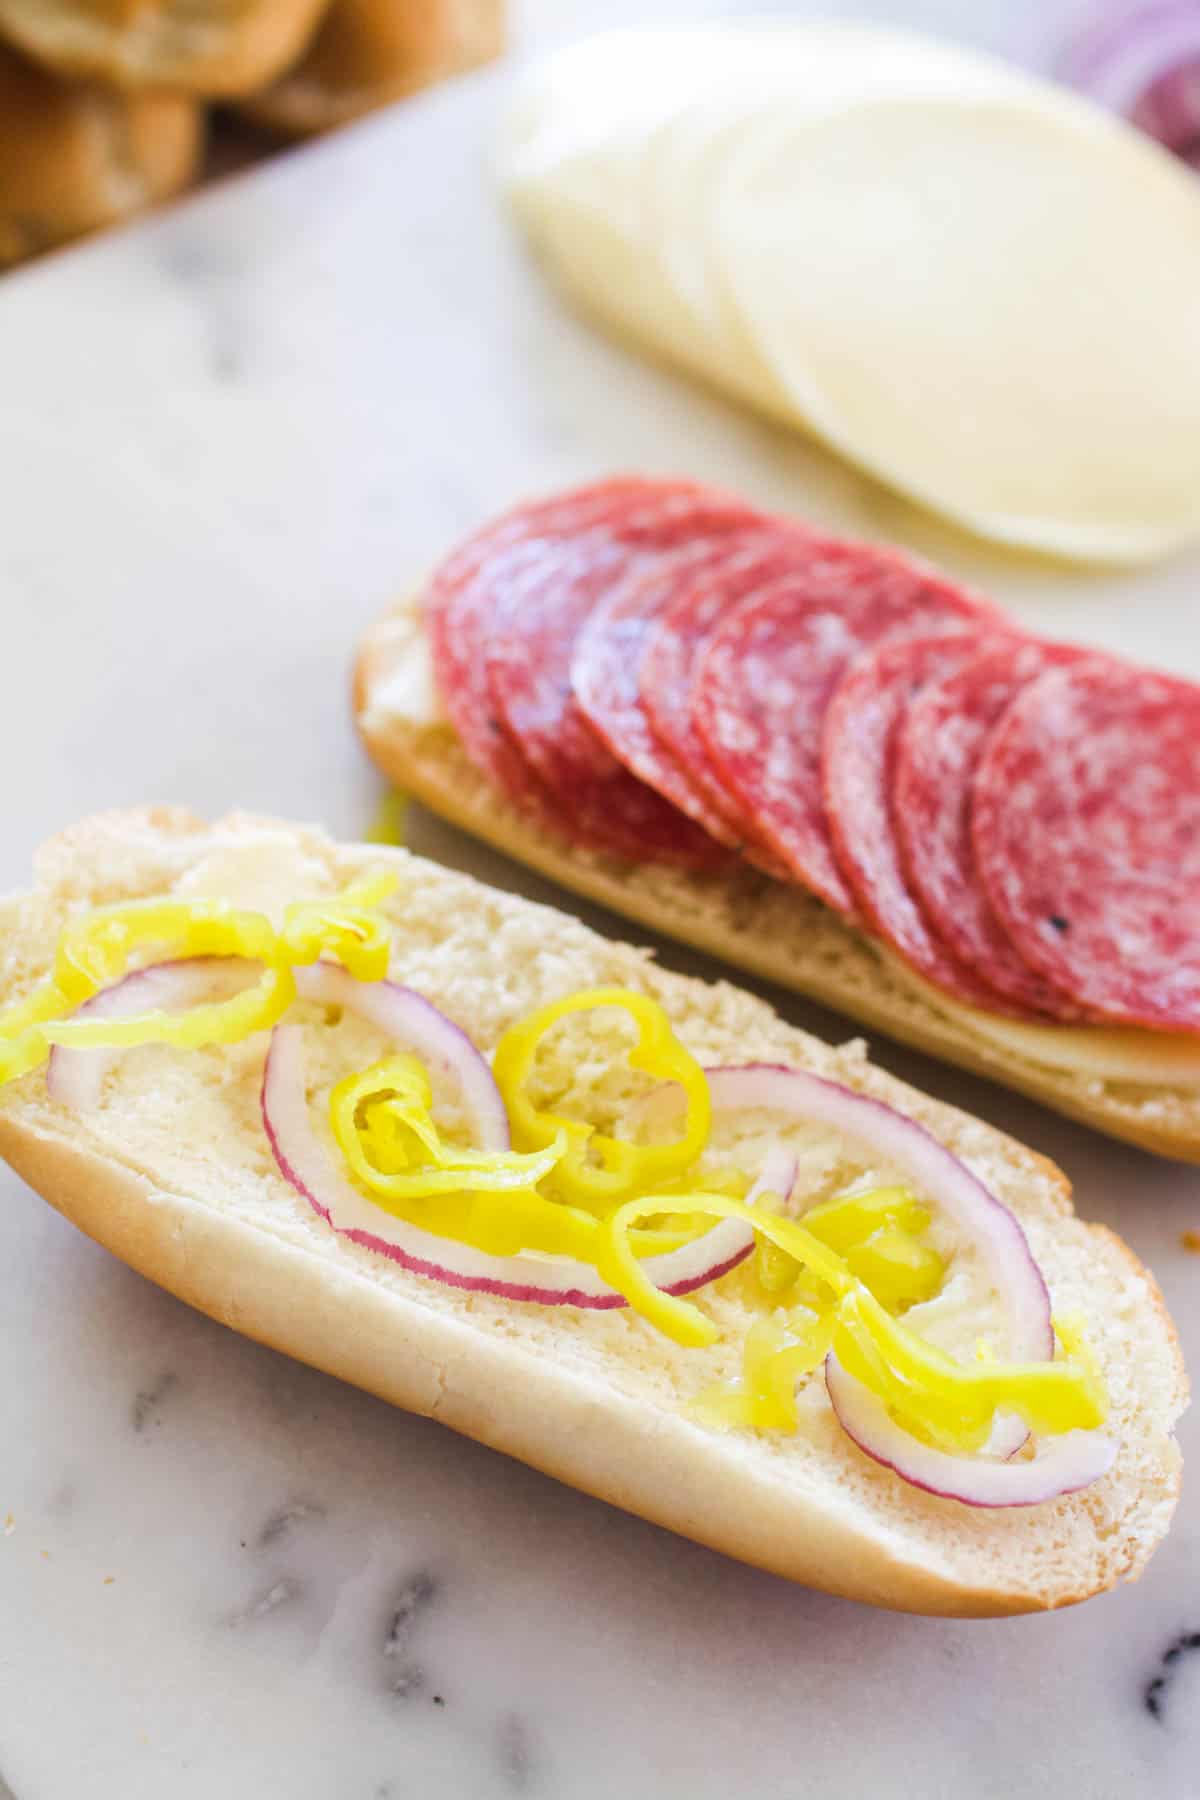 Red onions and pepperoncini pieces on one side of a roll with salami on the other.